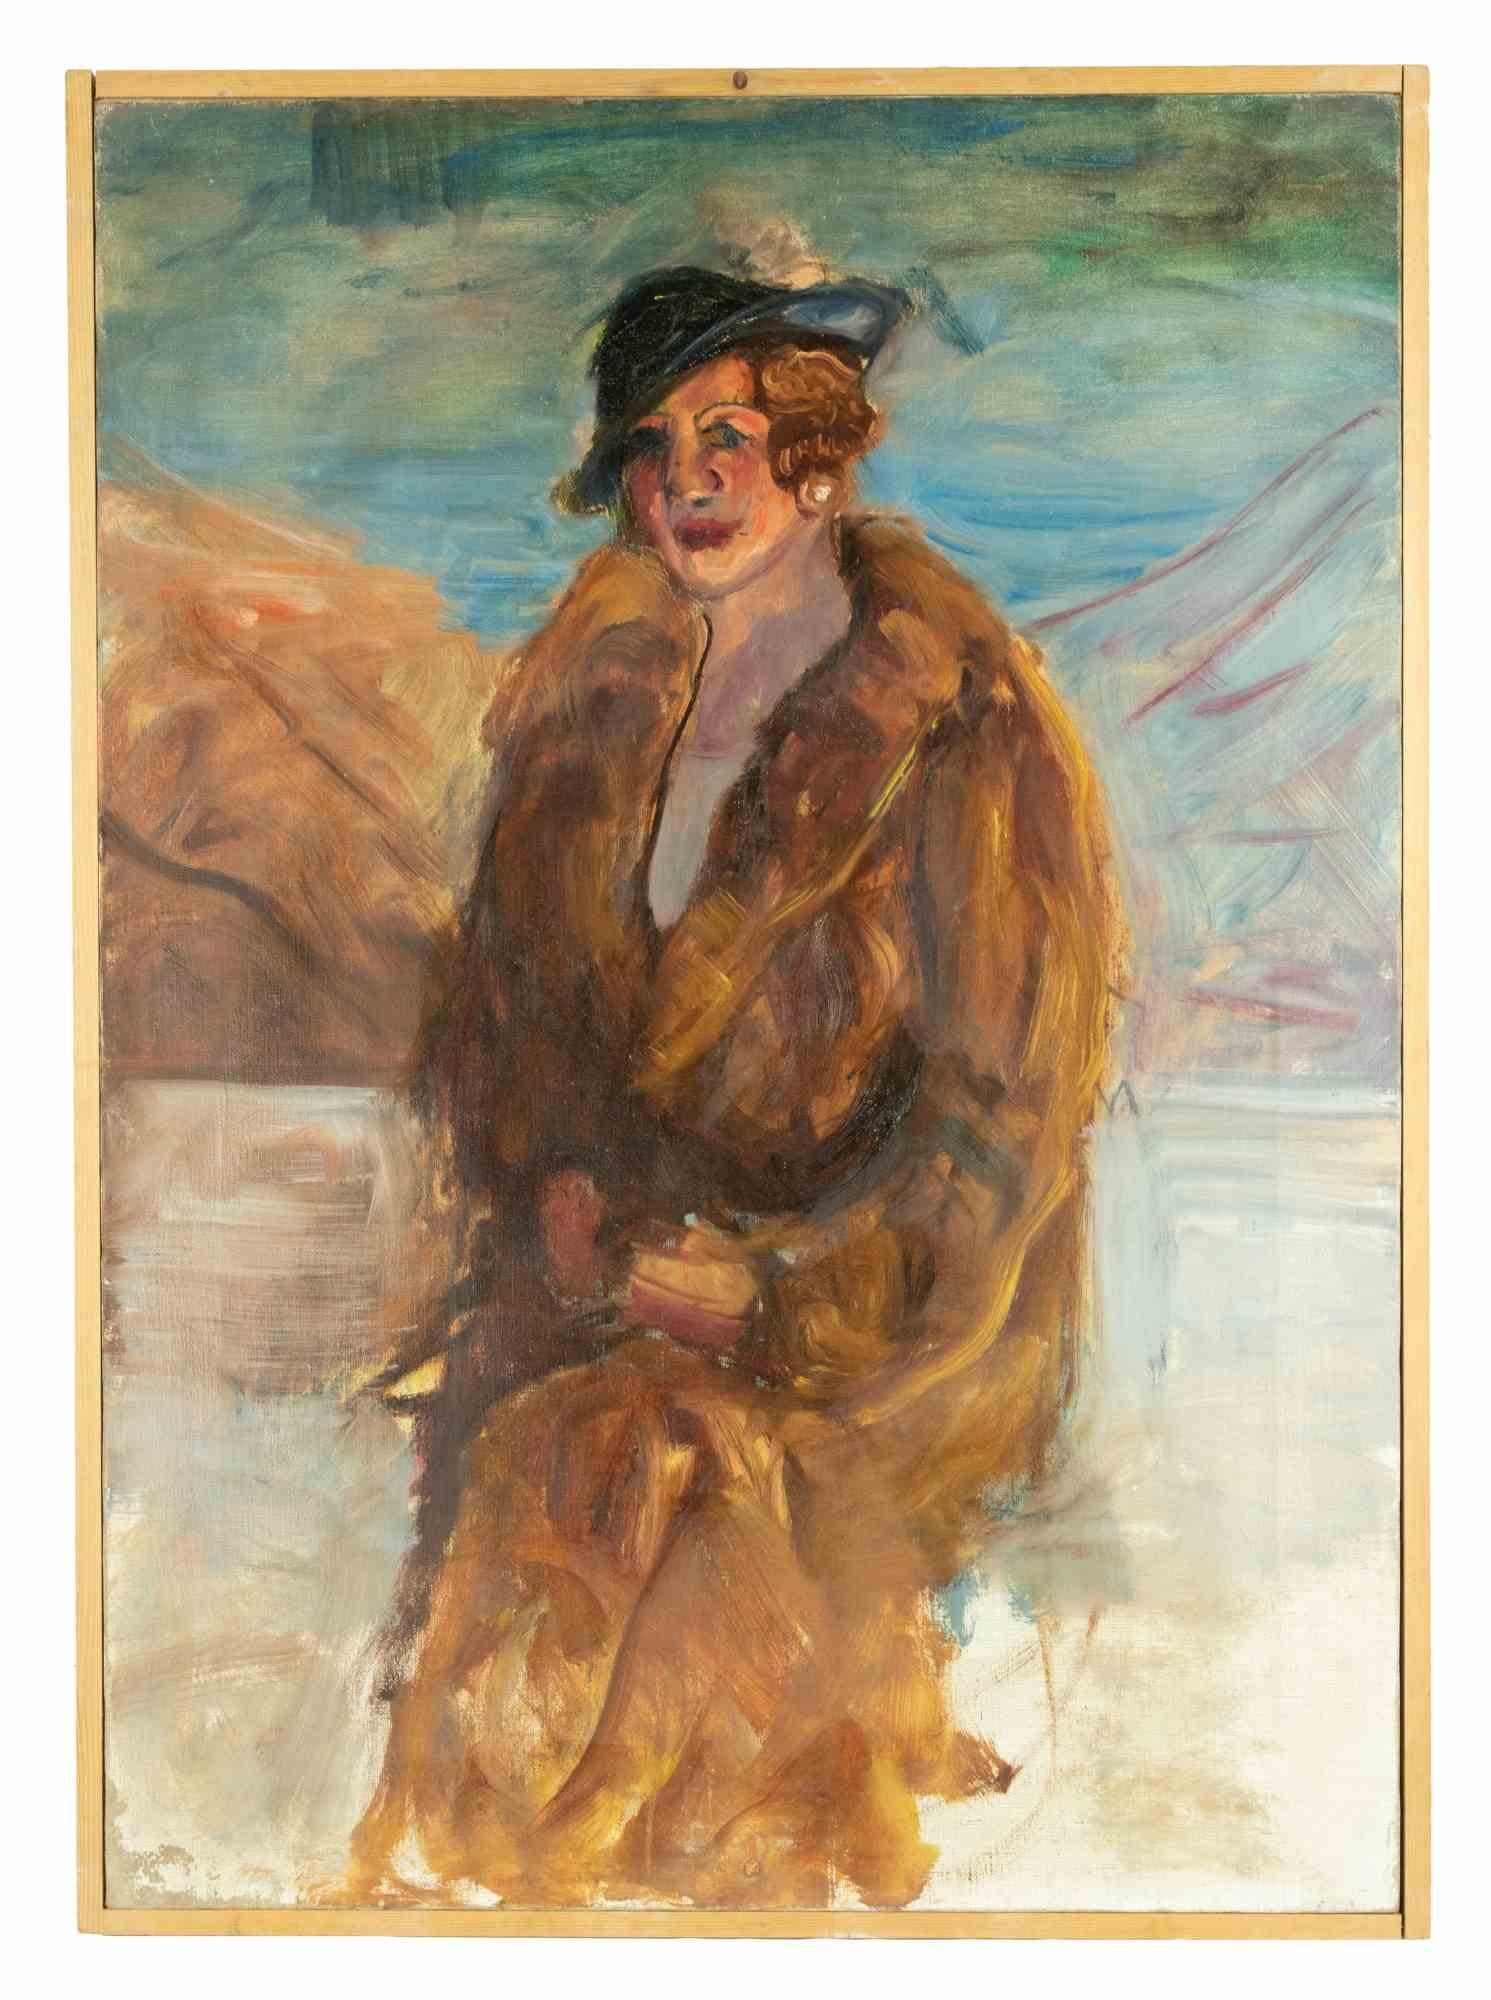 Lady with fur is an original modern artwork realized by Antonio Feltrinelli in 1930s.

Mixed colored oil painting on canvas.

Includes frame 110x3x79 cm

Not signed.

Antonio Feltrinelli (Milan, 1887 – Gargnano, 1942)

He was born in Milan on June